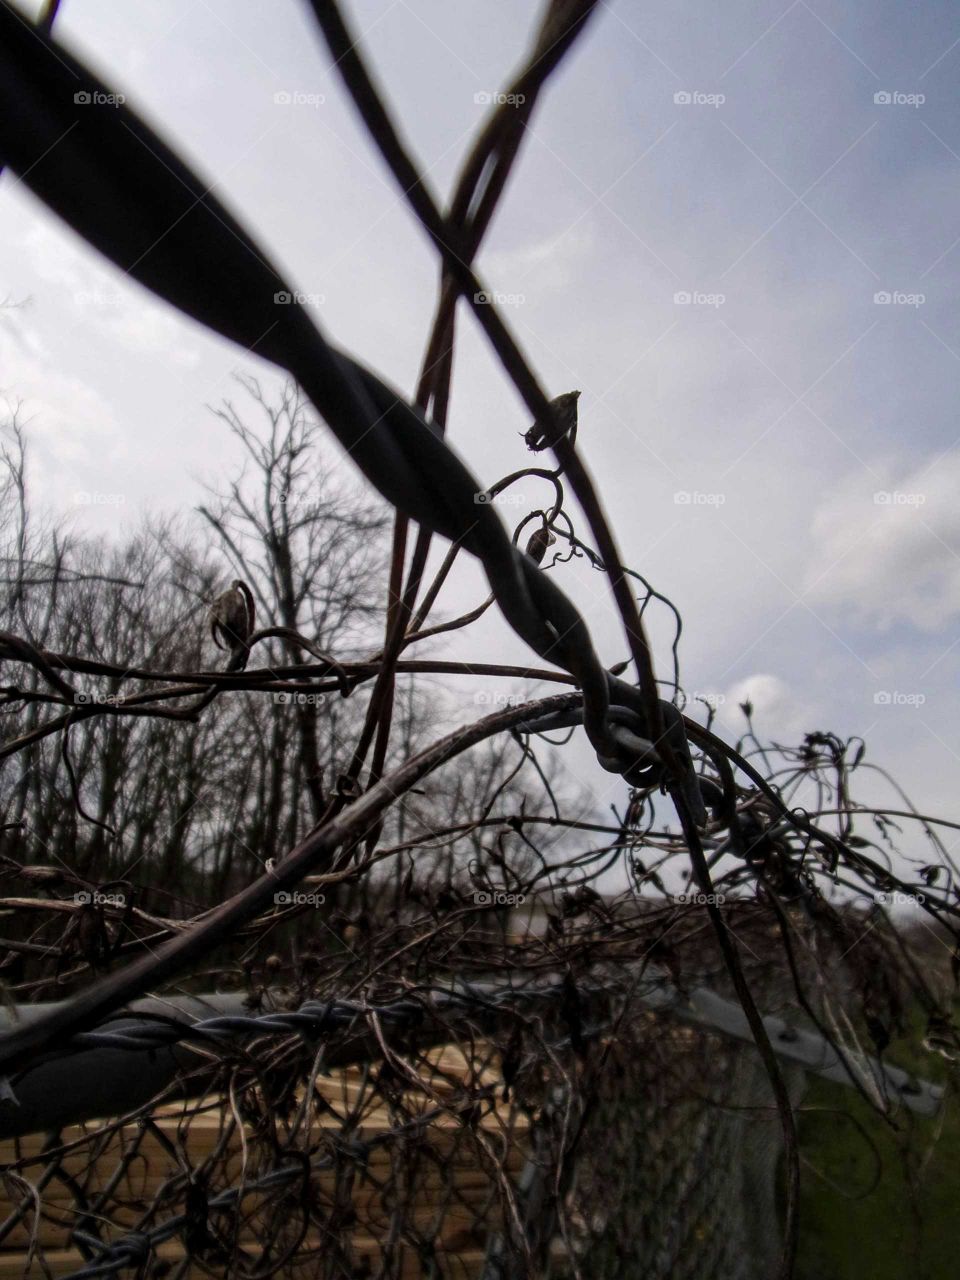 Barbed wire wrapped in dead vines